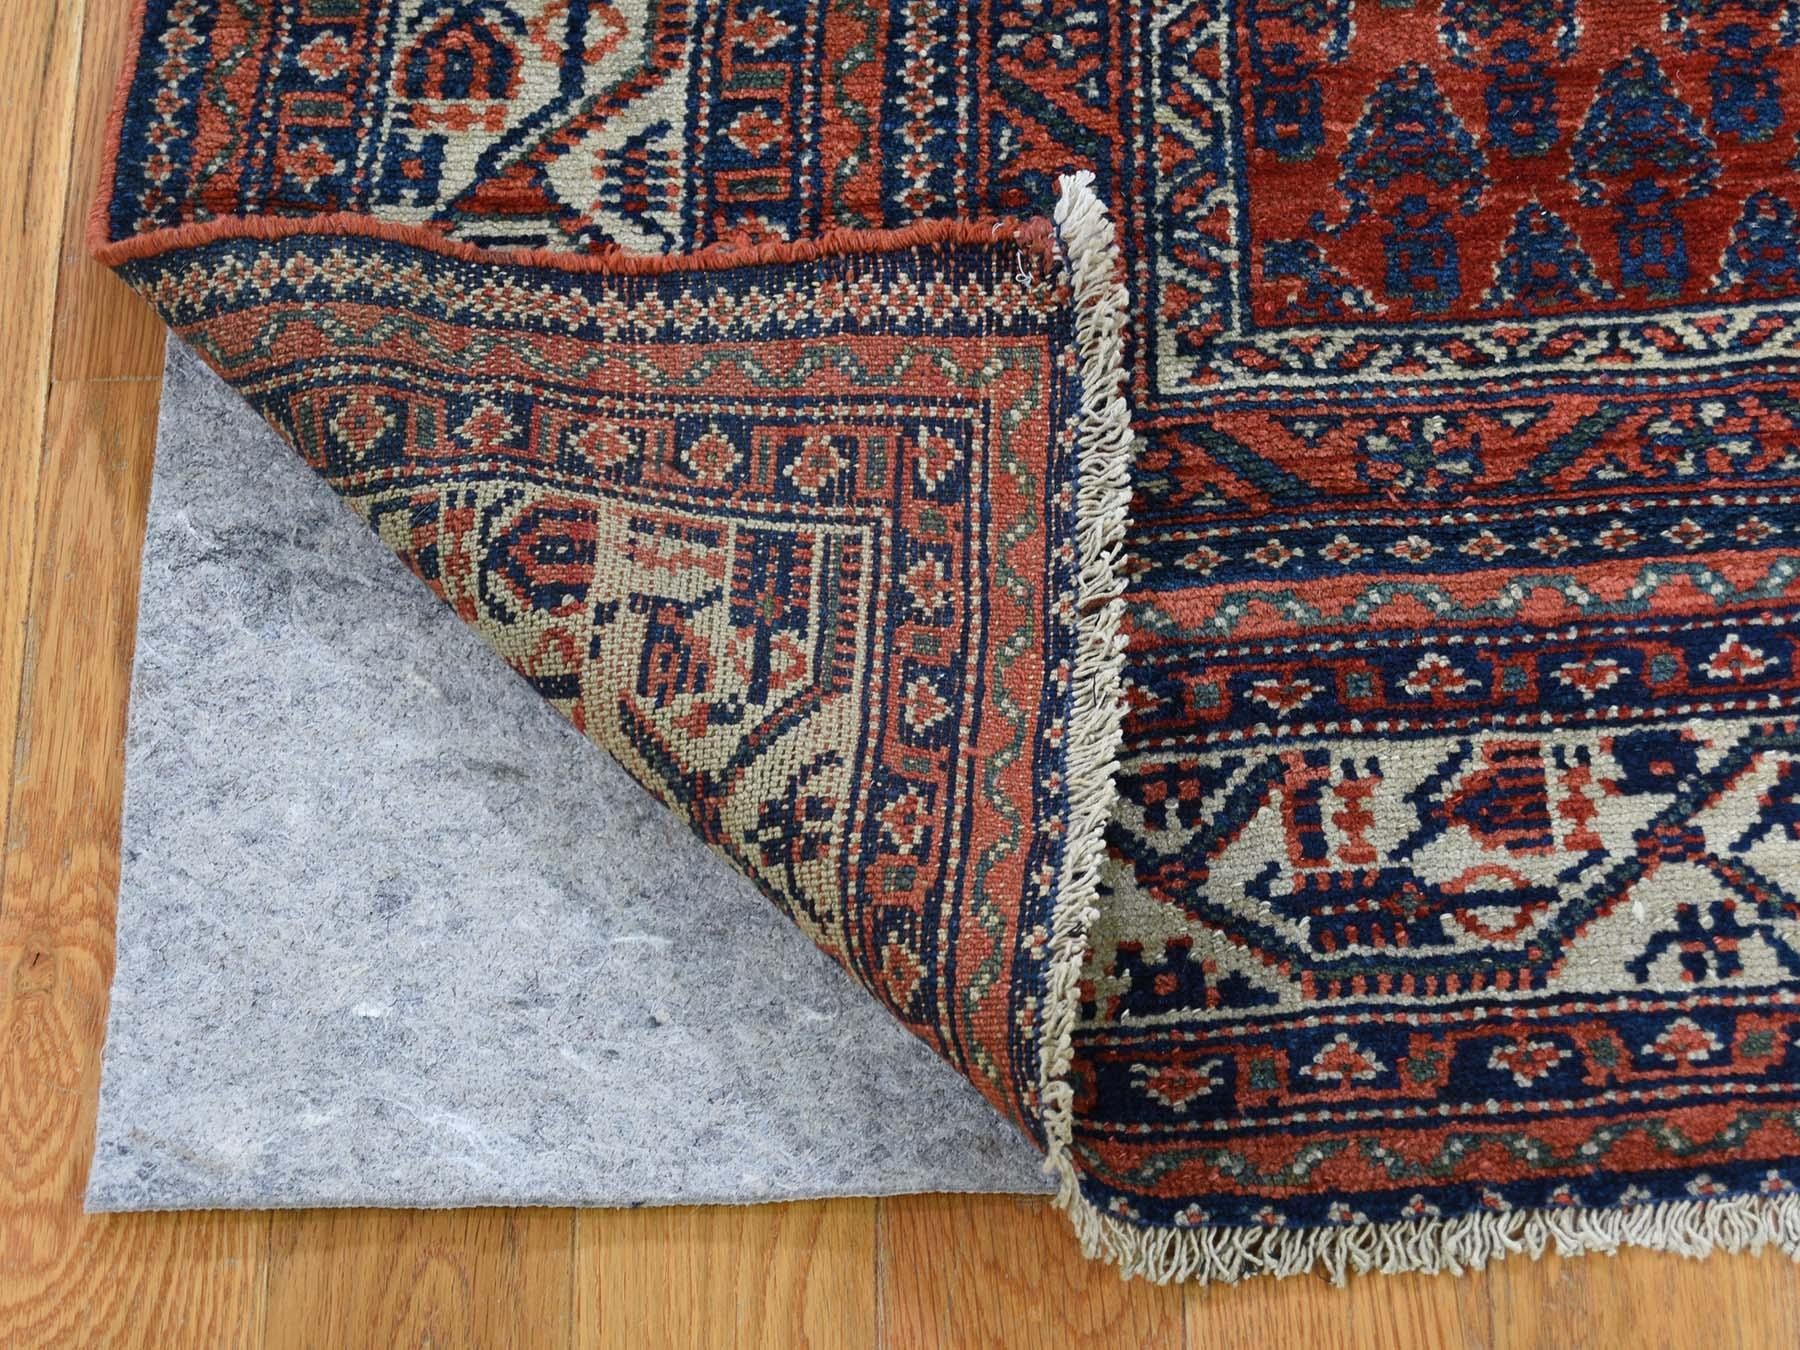 This is a genuine hand knotted oriental rug. It is not hand tufted or Machine Made rug. Our entire inventory is made of either hand knotted or handwoven rugs.

Bring life to your home with this lovely pure wool red, is an original Antique Persian